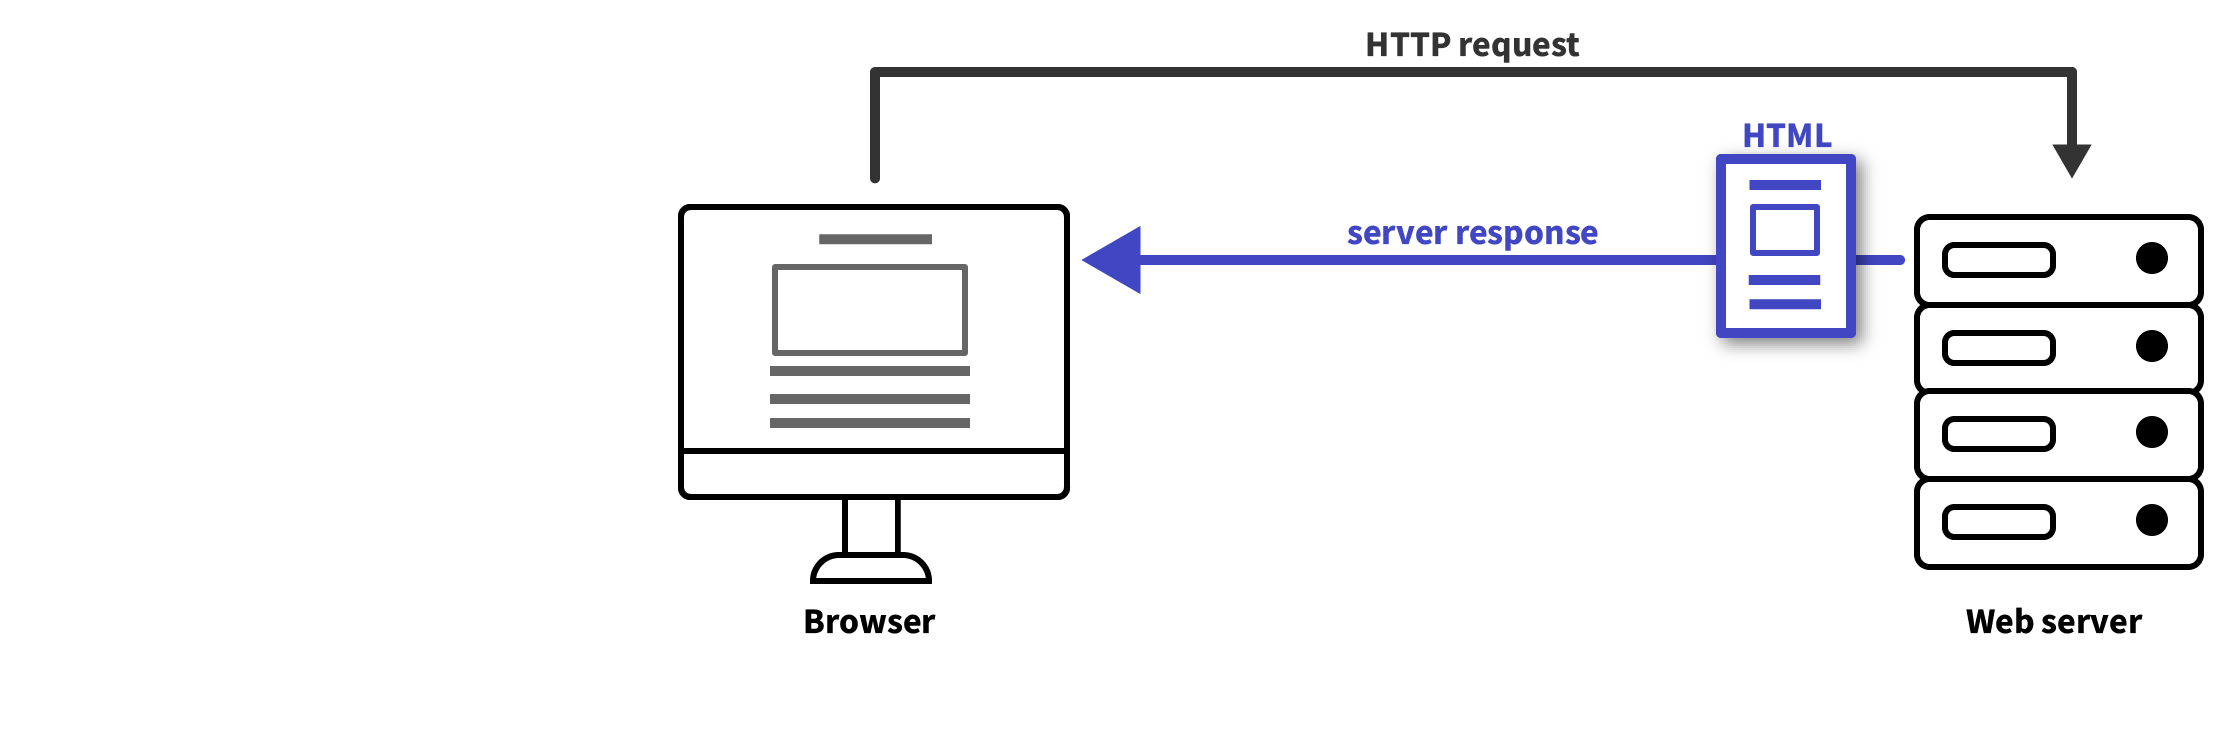 A diagram showing how a browser performs an HTTP request and a server sending an HTML file in response